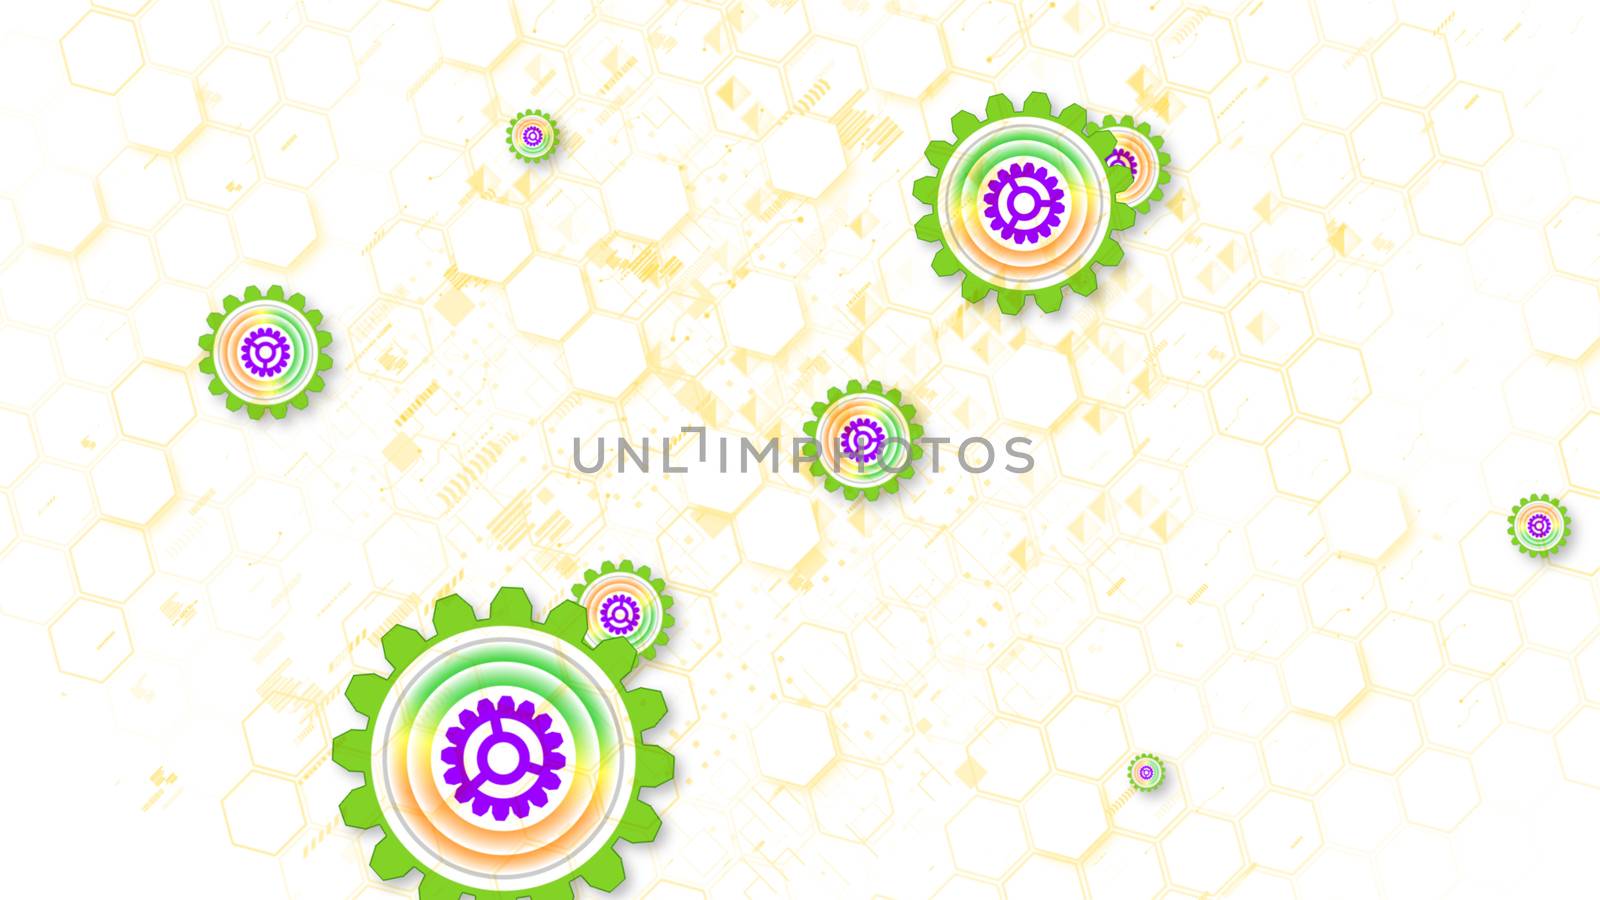 Optimistic 3d illustration of cyber security cogwheels of light brown, green and violet colors in the white background. They soar and spin shaping the mood of joy and innovation.